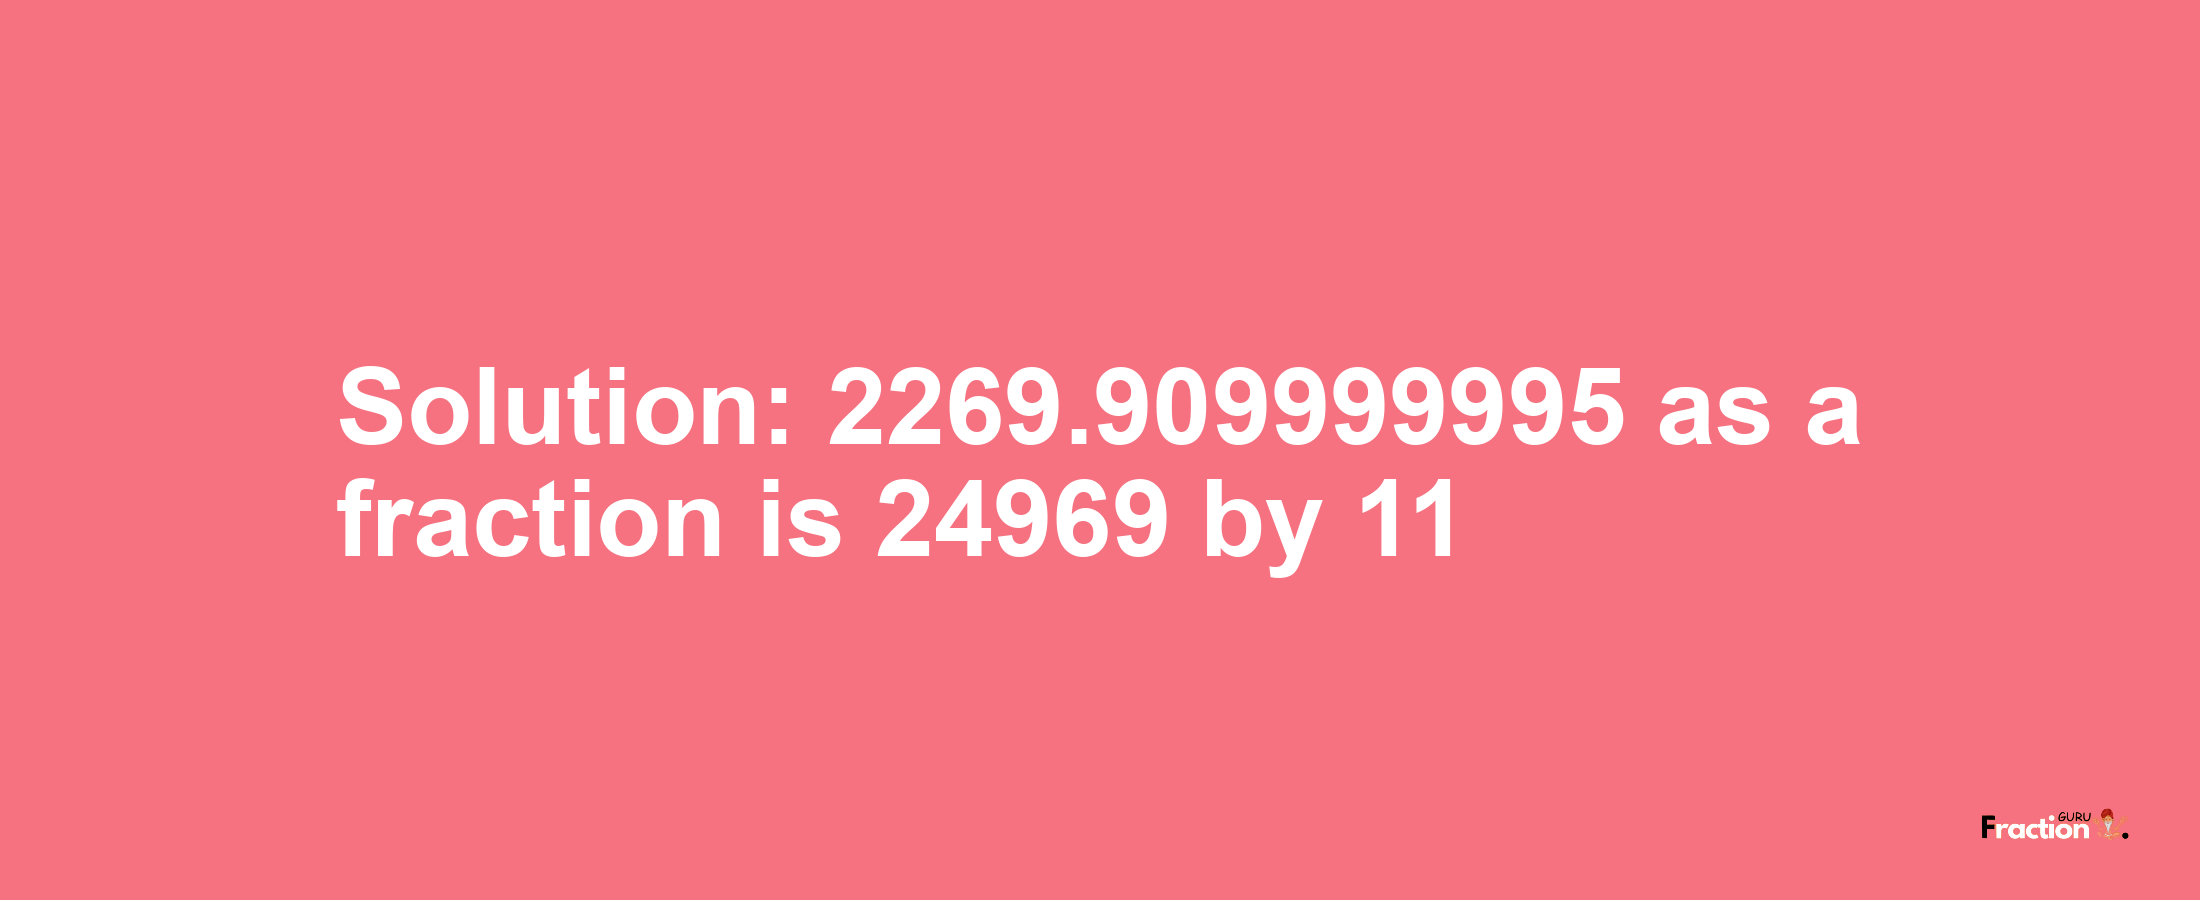 Solution:2269.909999995 as a fraction is 24969/11